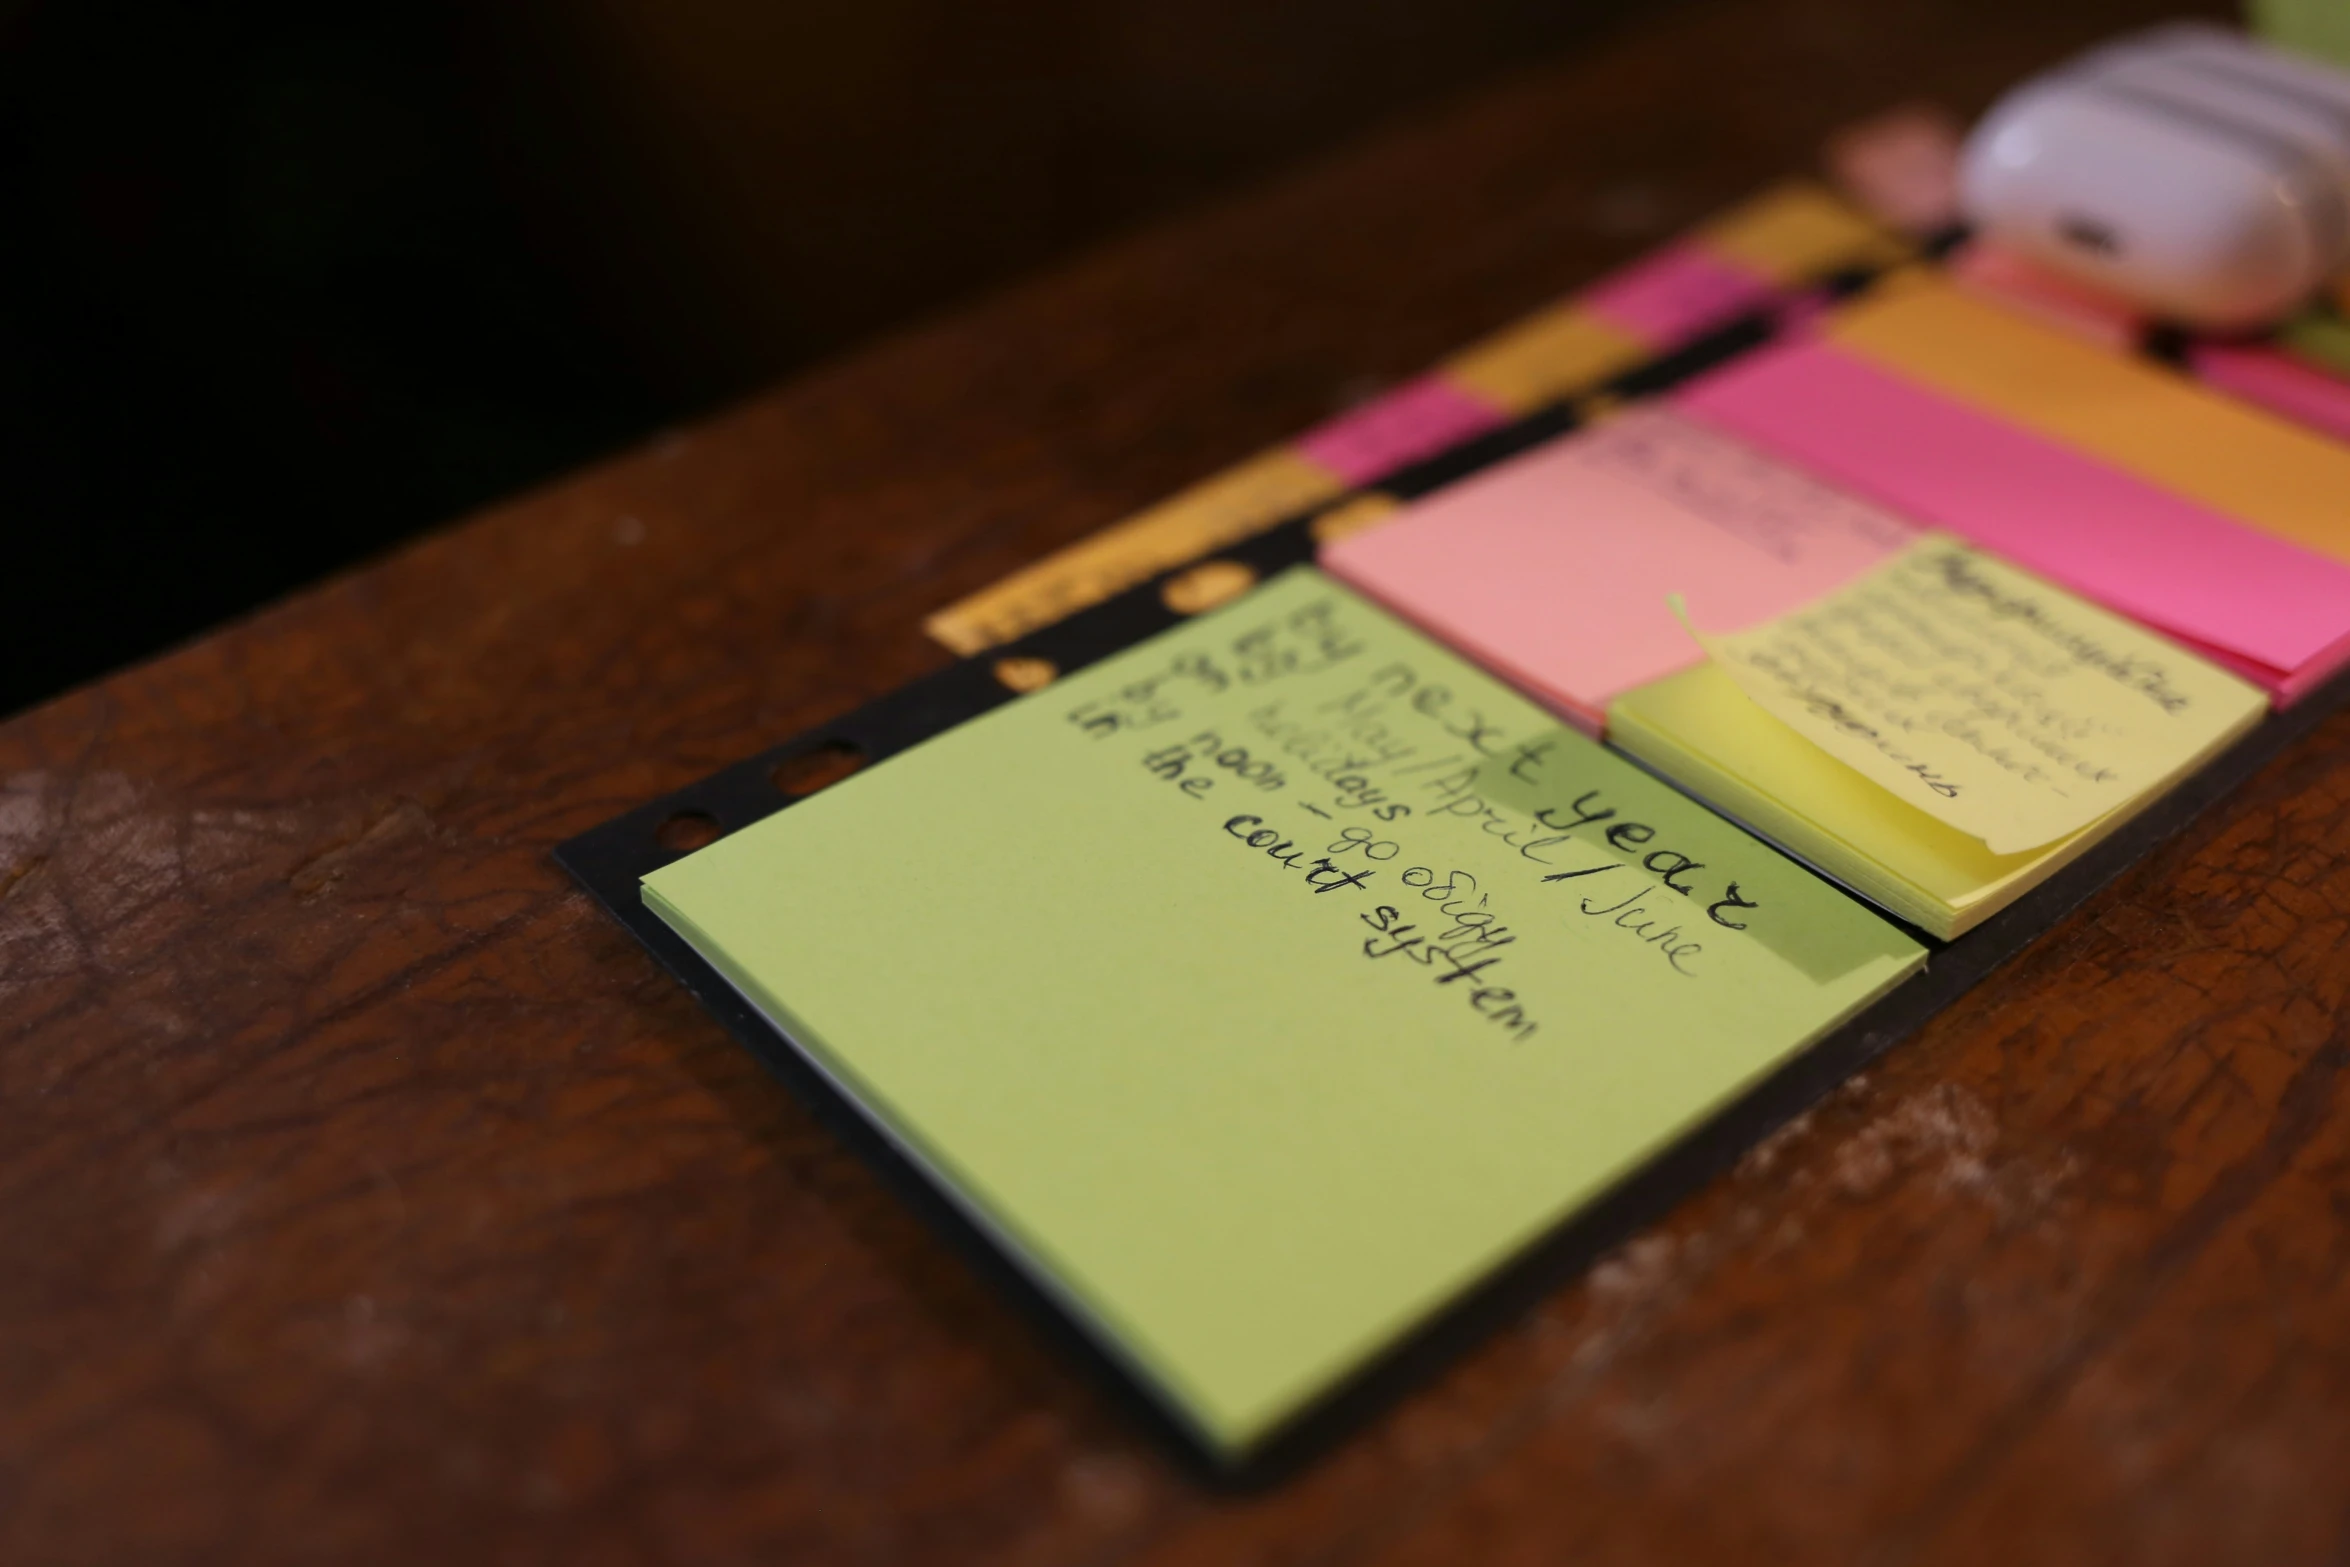 note papers are arranged with post it notes on them